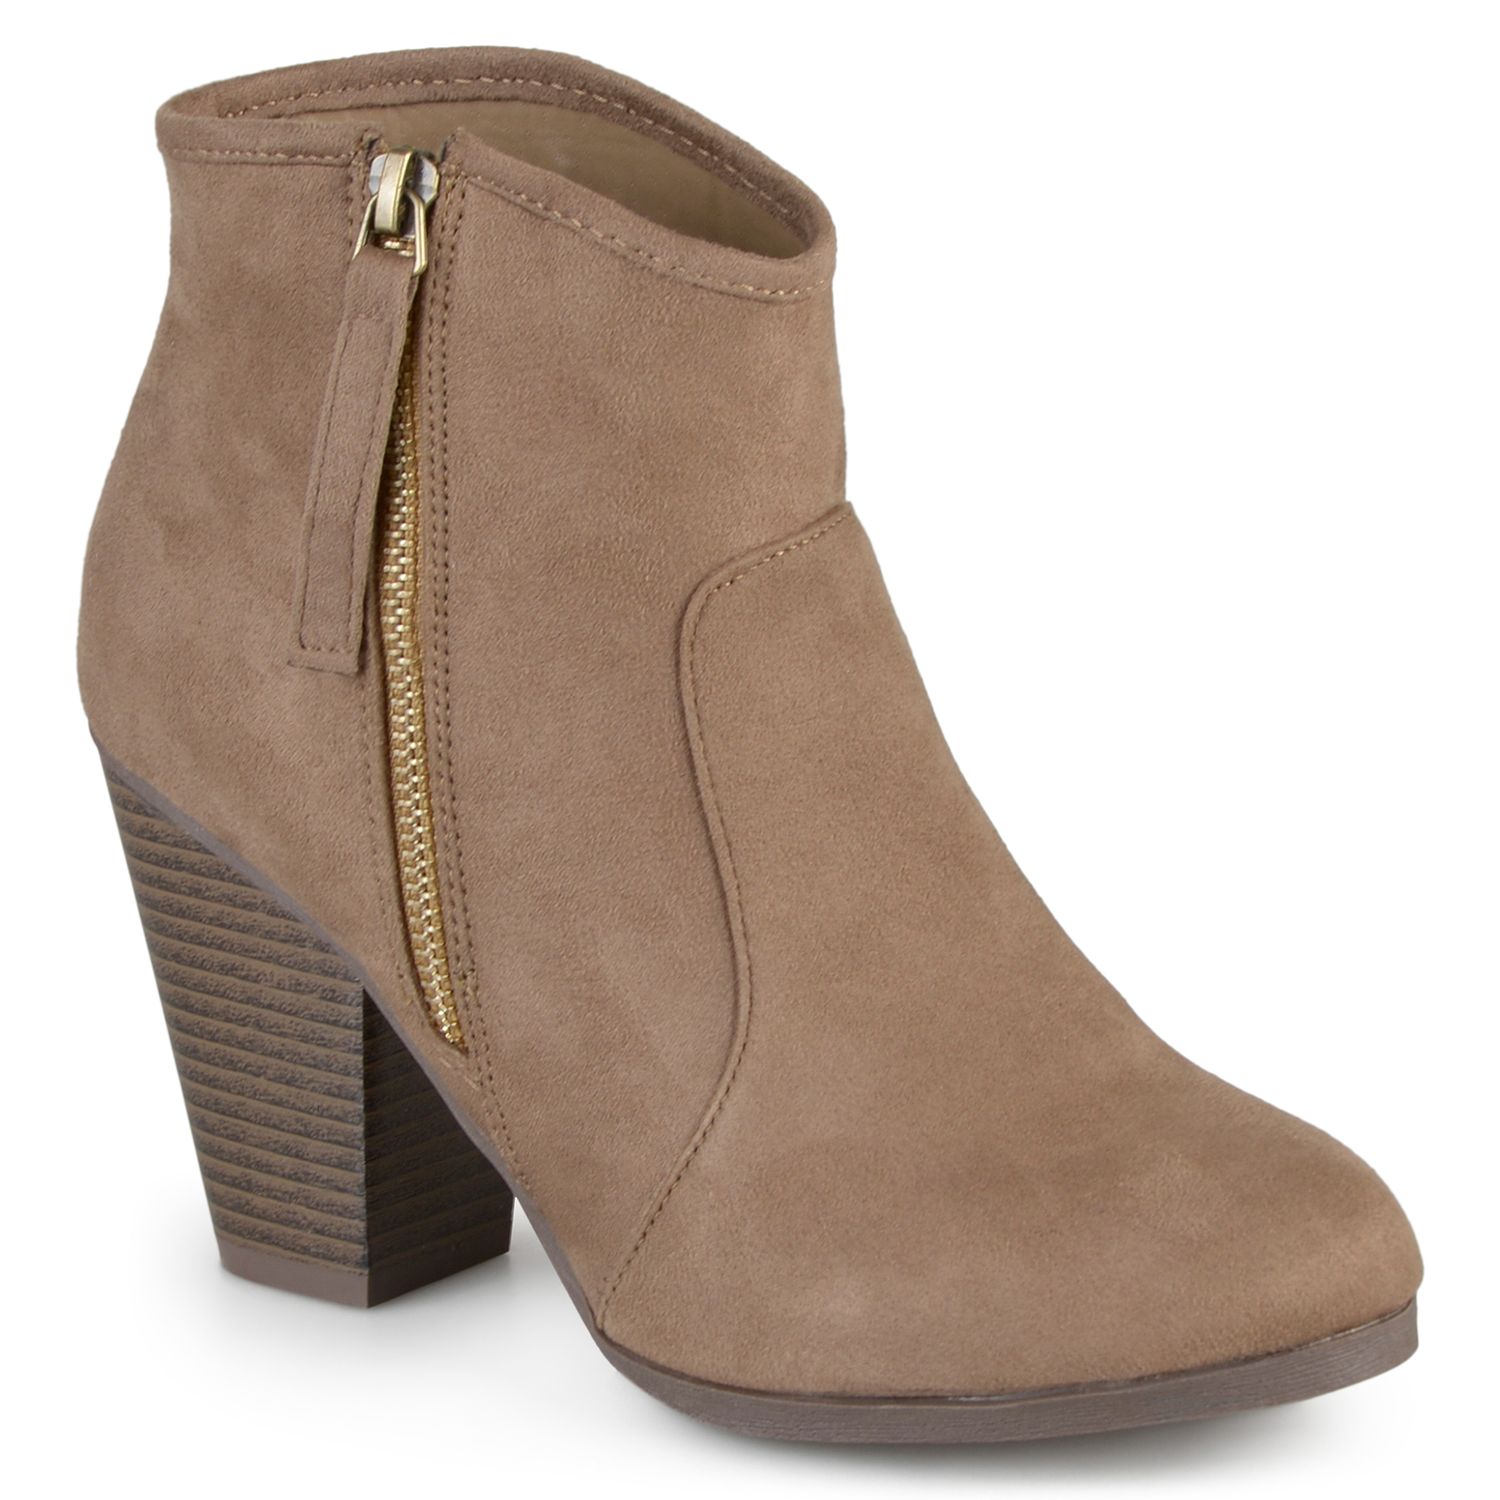 journee collection strap women's ankle boots